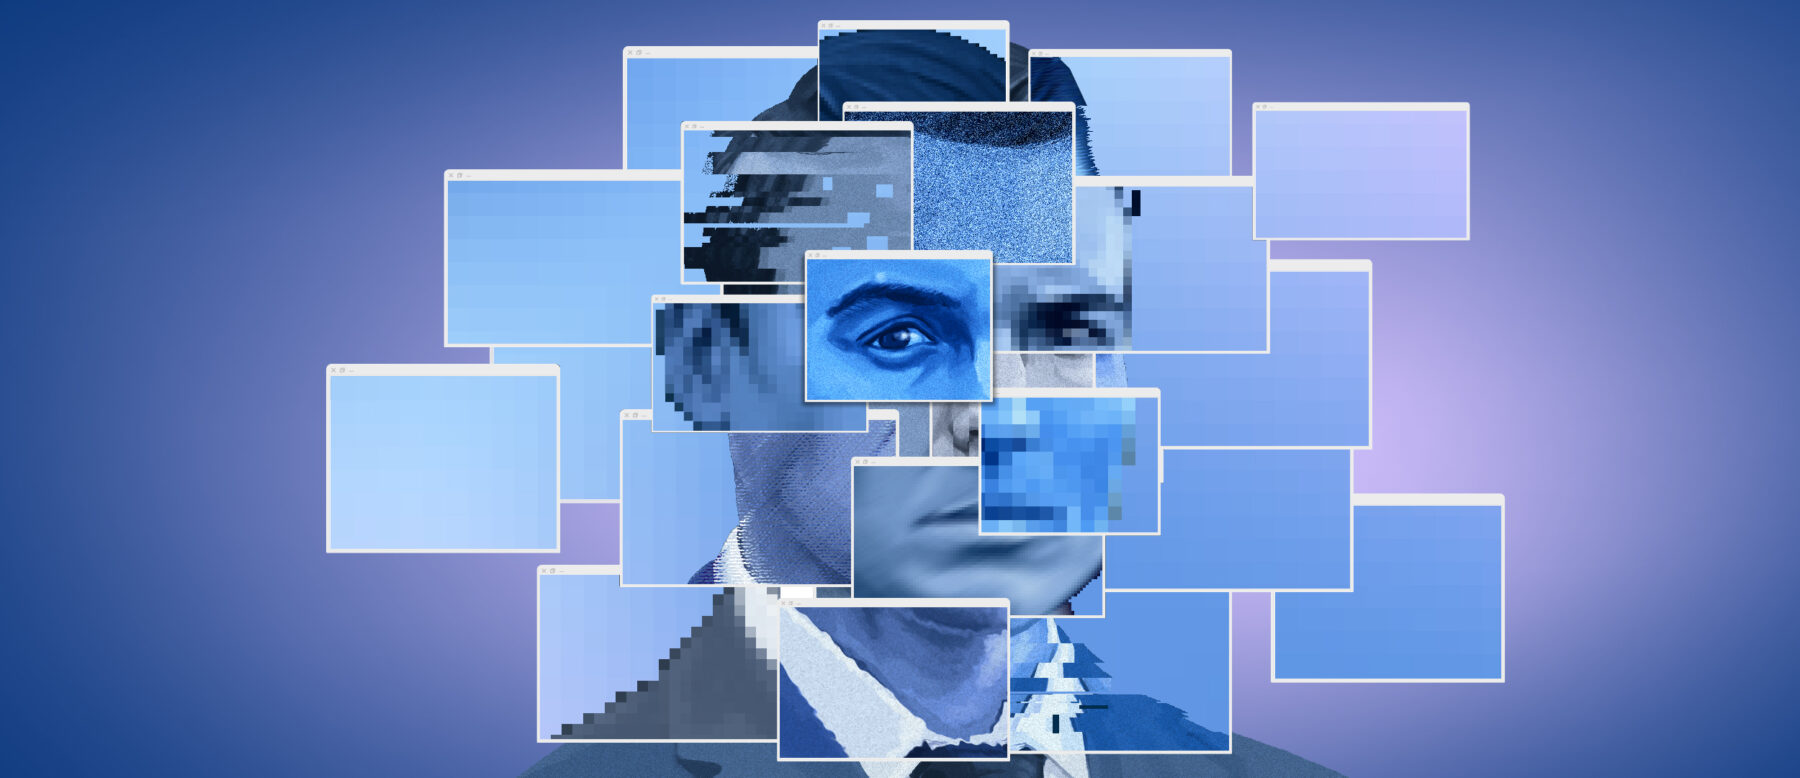 Image of a man's face distorted with squares and pixels.